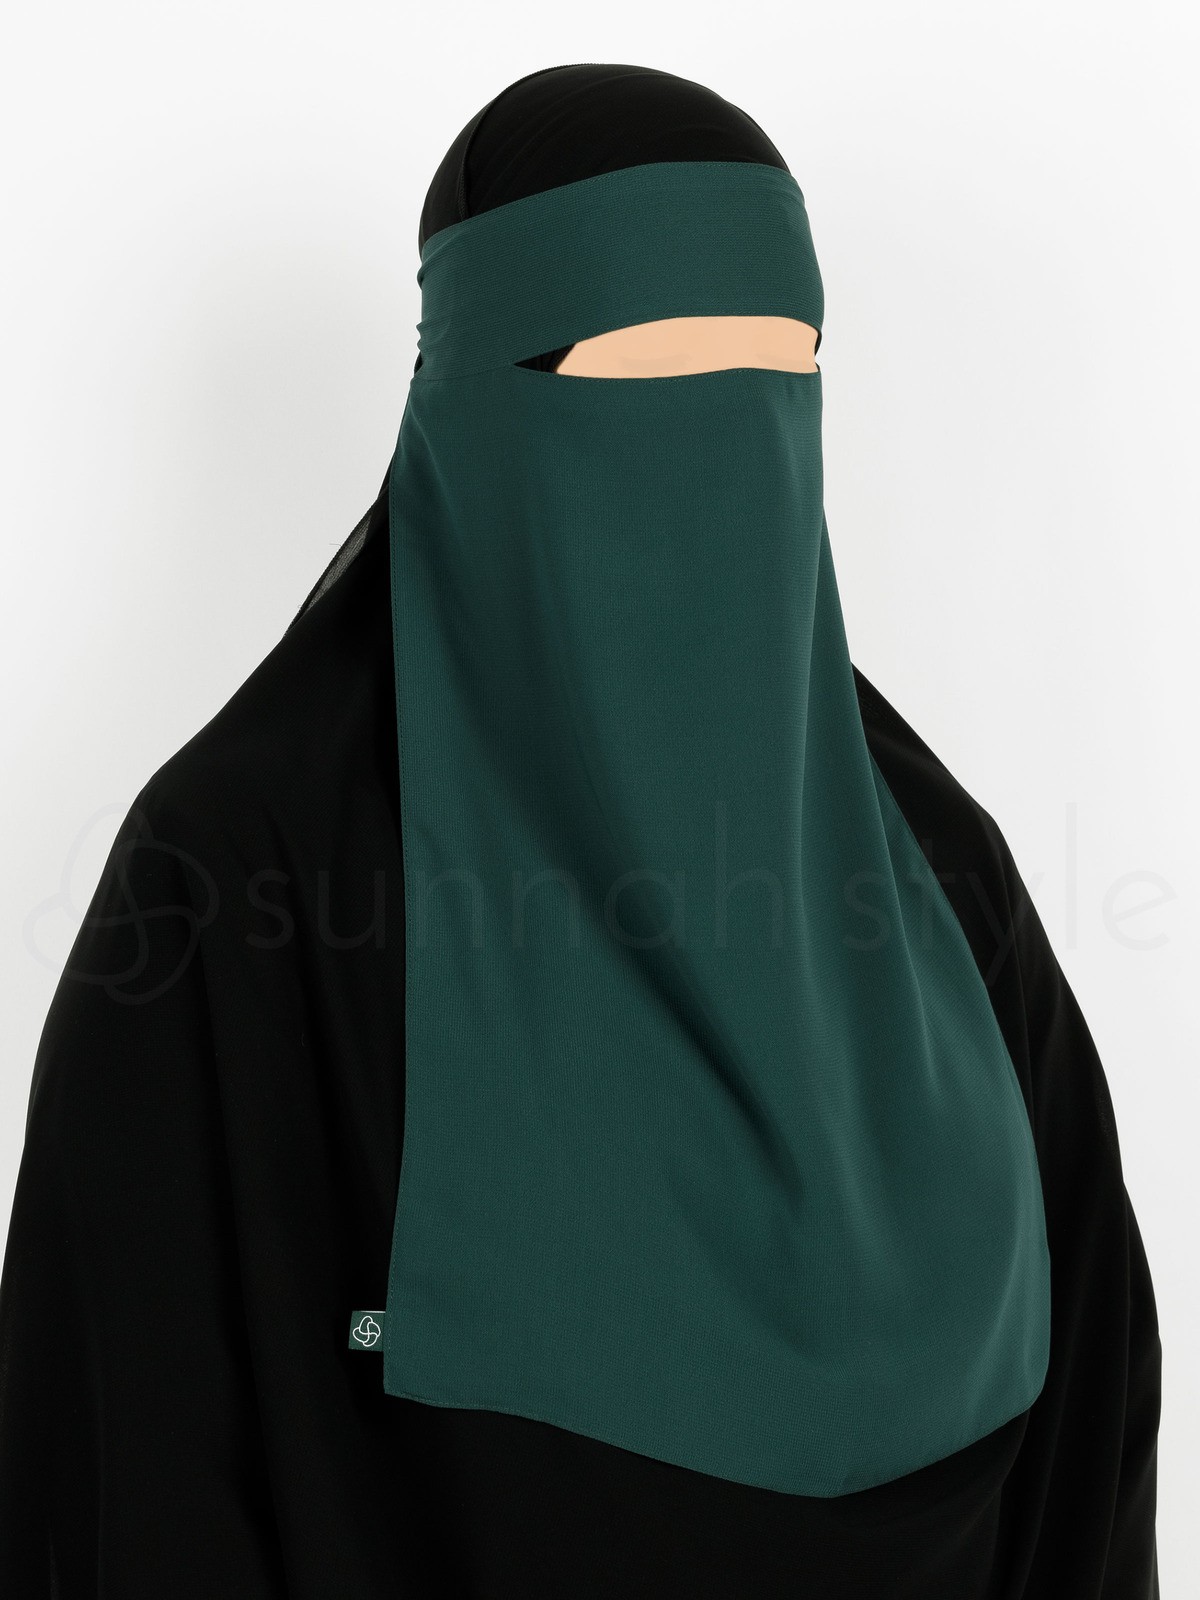 Sunnah Style - One Layer Niqab (Pine)